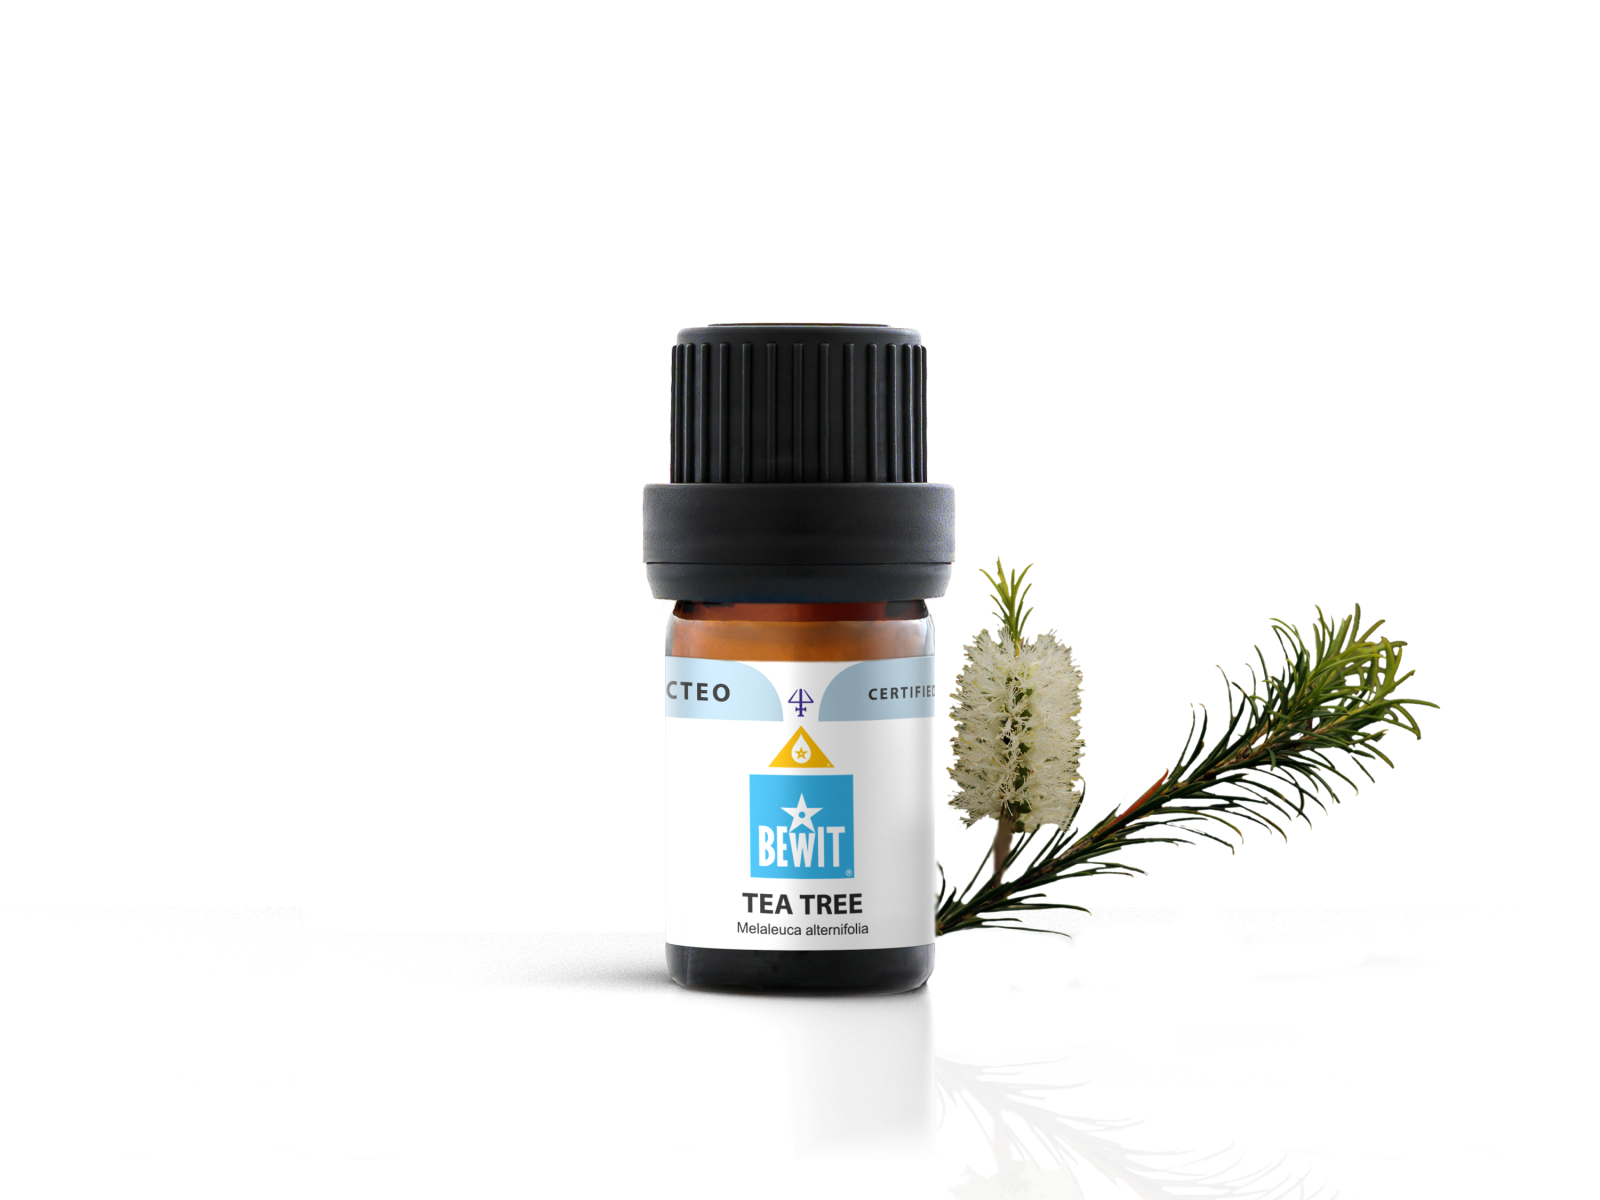 Tea tree - It is a 100% pure essential oil - 2